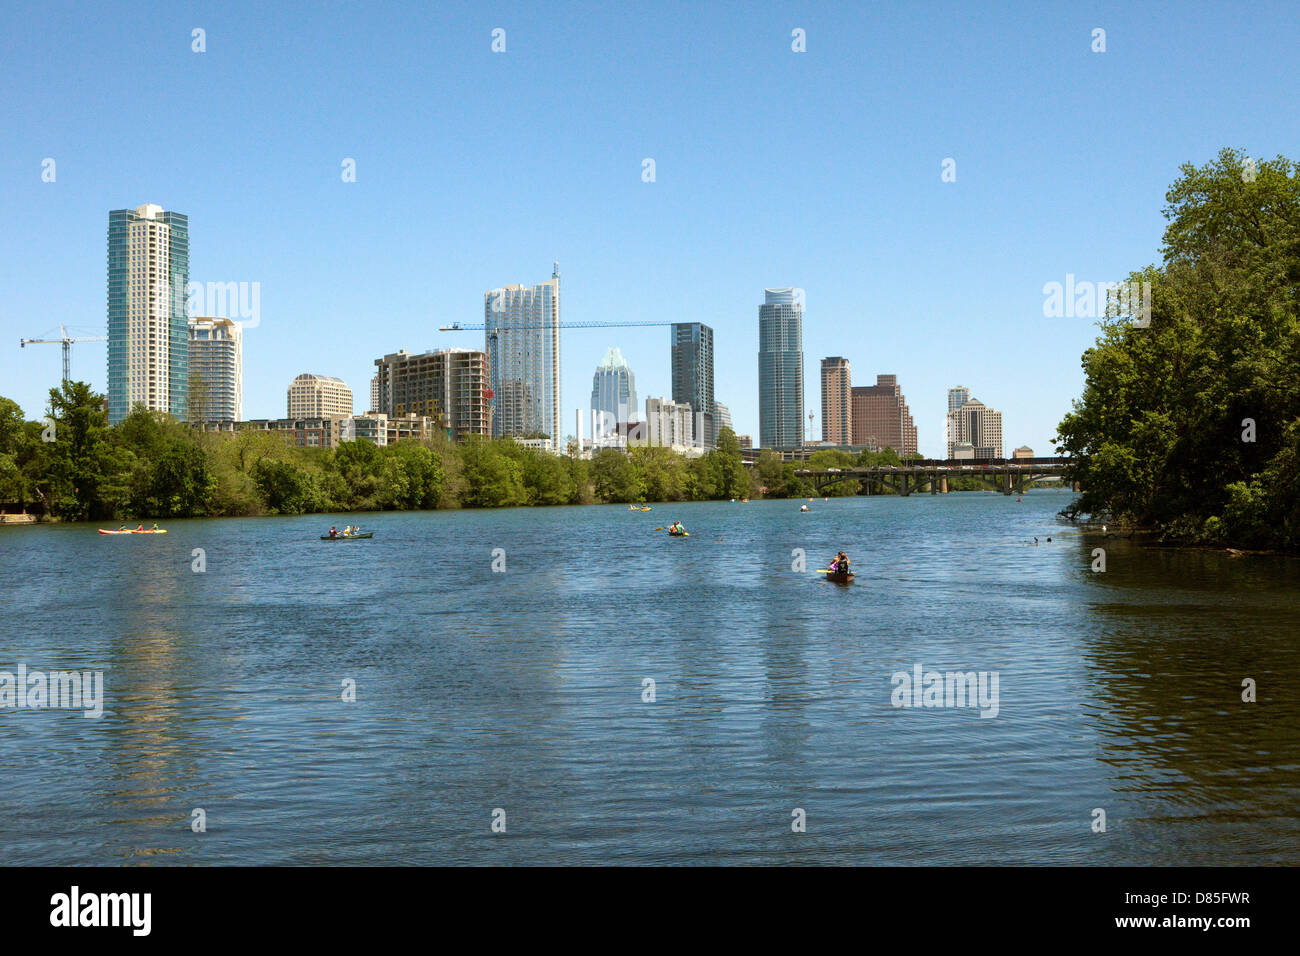 A view of the Colorado River in Austin, Texas Stock Photo